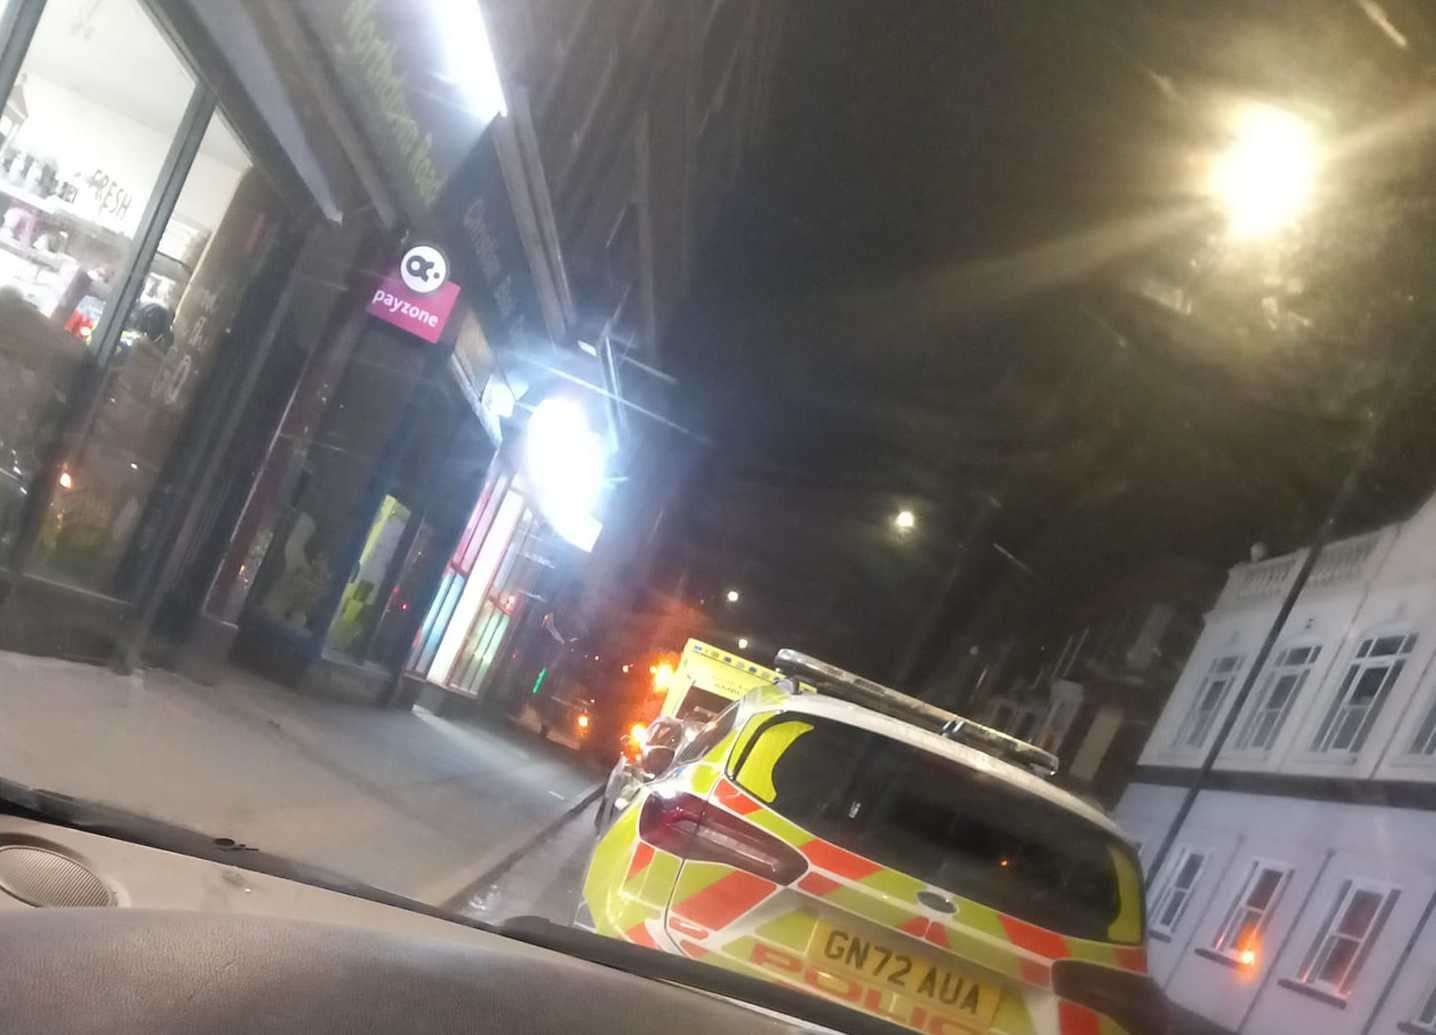 Police were called to Northdown Road in Cliftonville after a woman fell from a building. Picture: Zarah Marie Weller